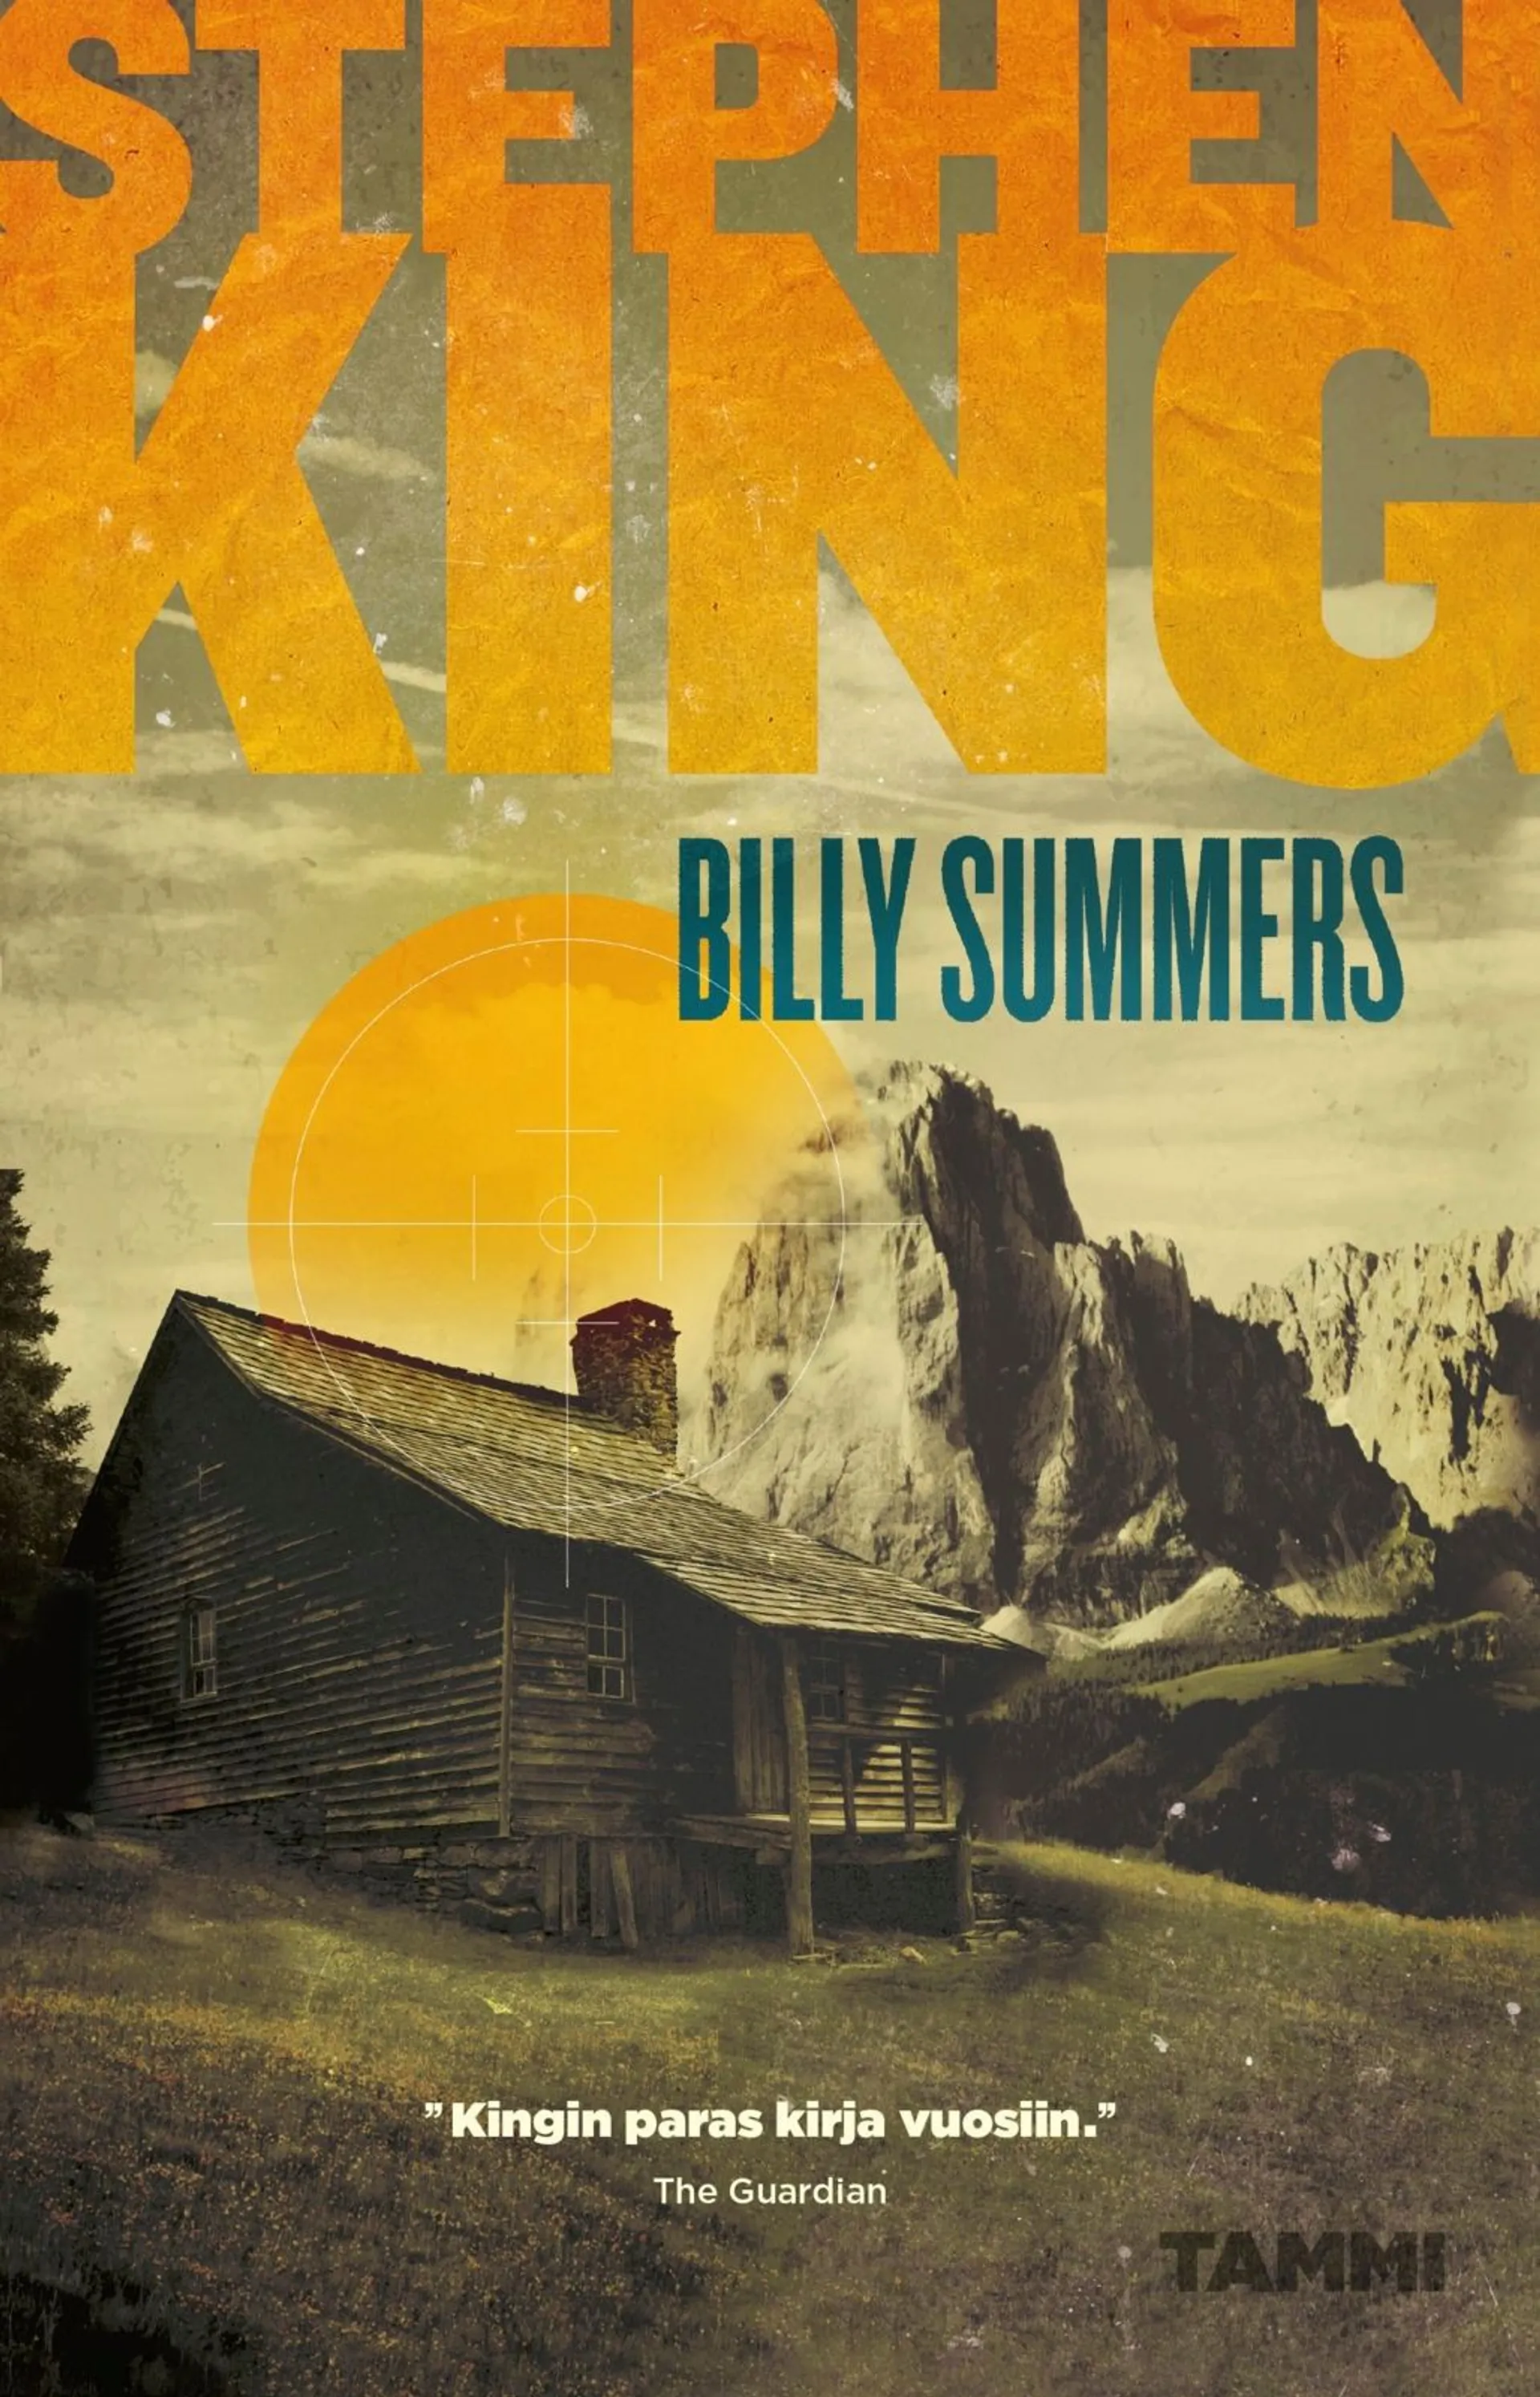 King, Billy Summers